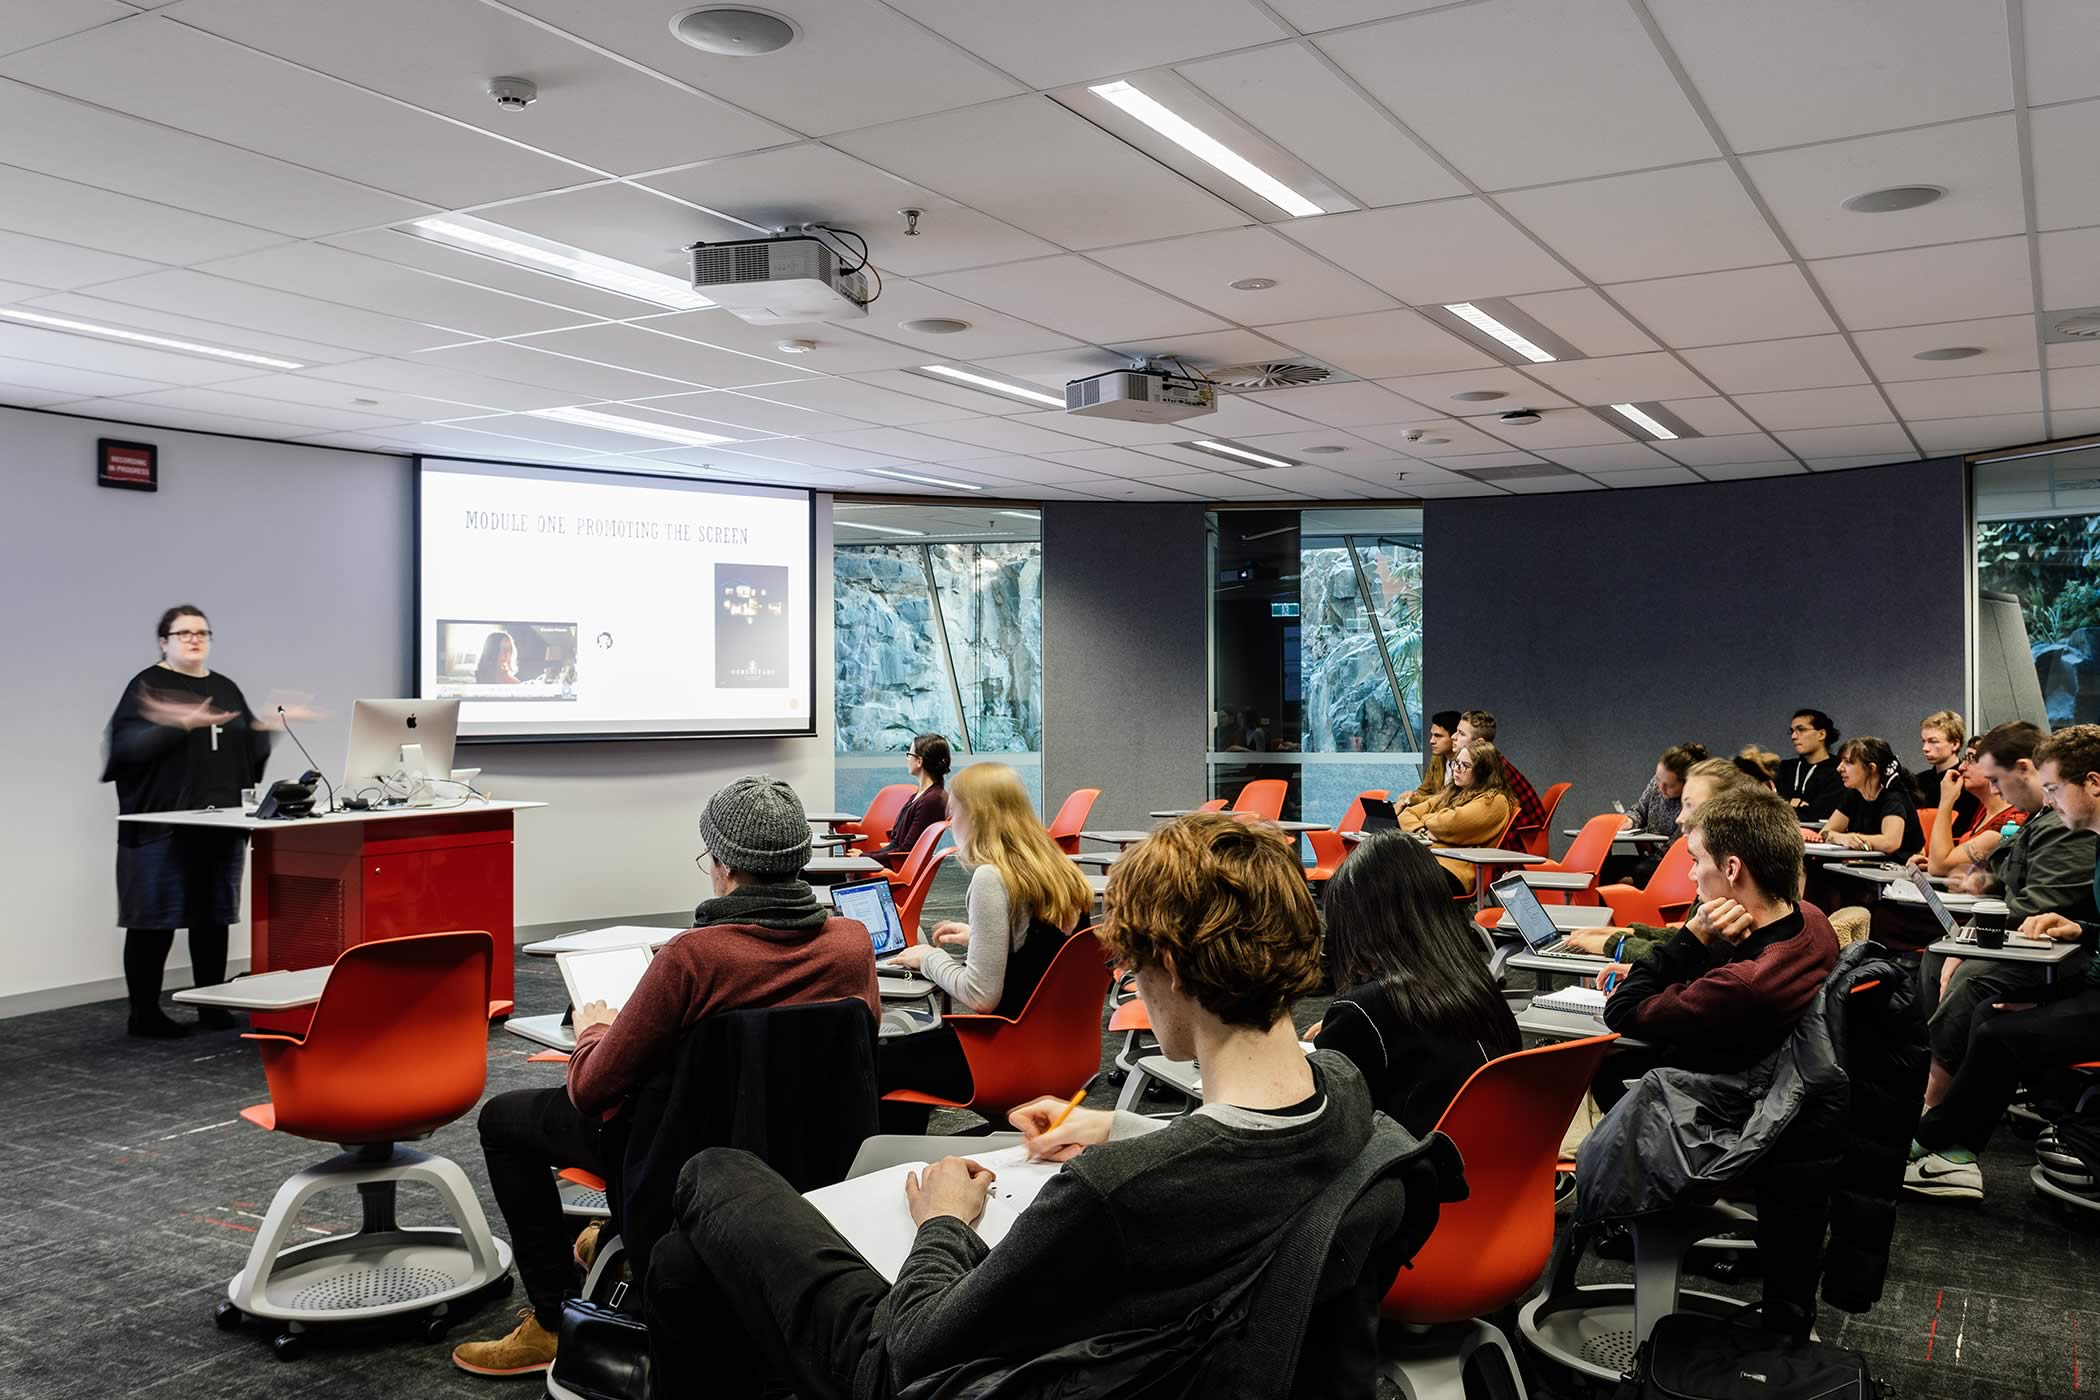 The Media School – University of Tasmania: Elliptical learning spaces support 21st century pedagogy with easily re-configured loose furniture layouts to suit small group collaborative work or a traditional lecture format. Photo by Adam Gibson.